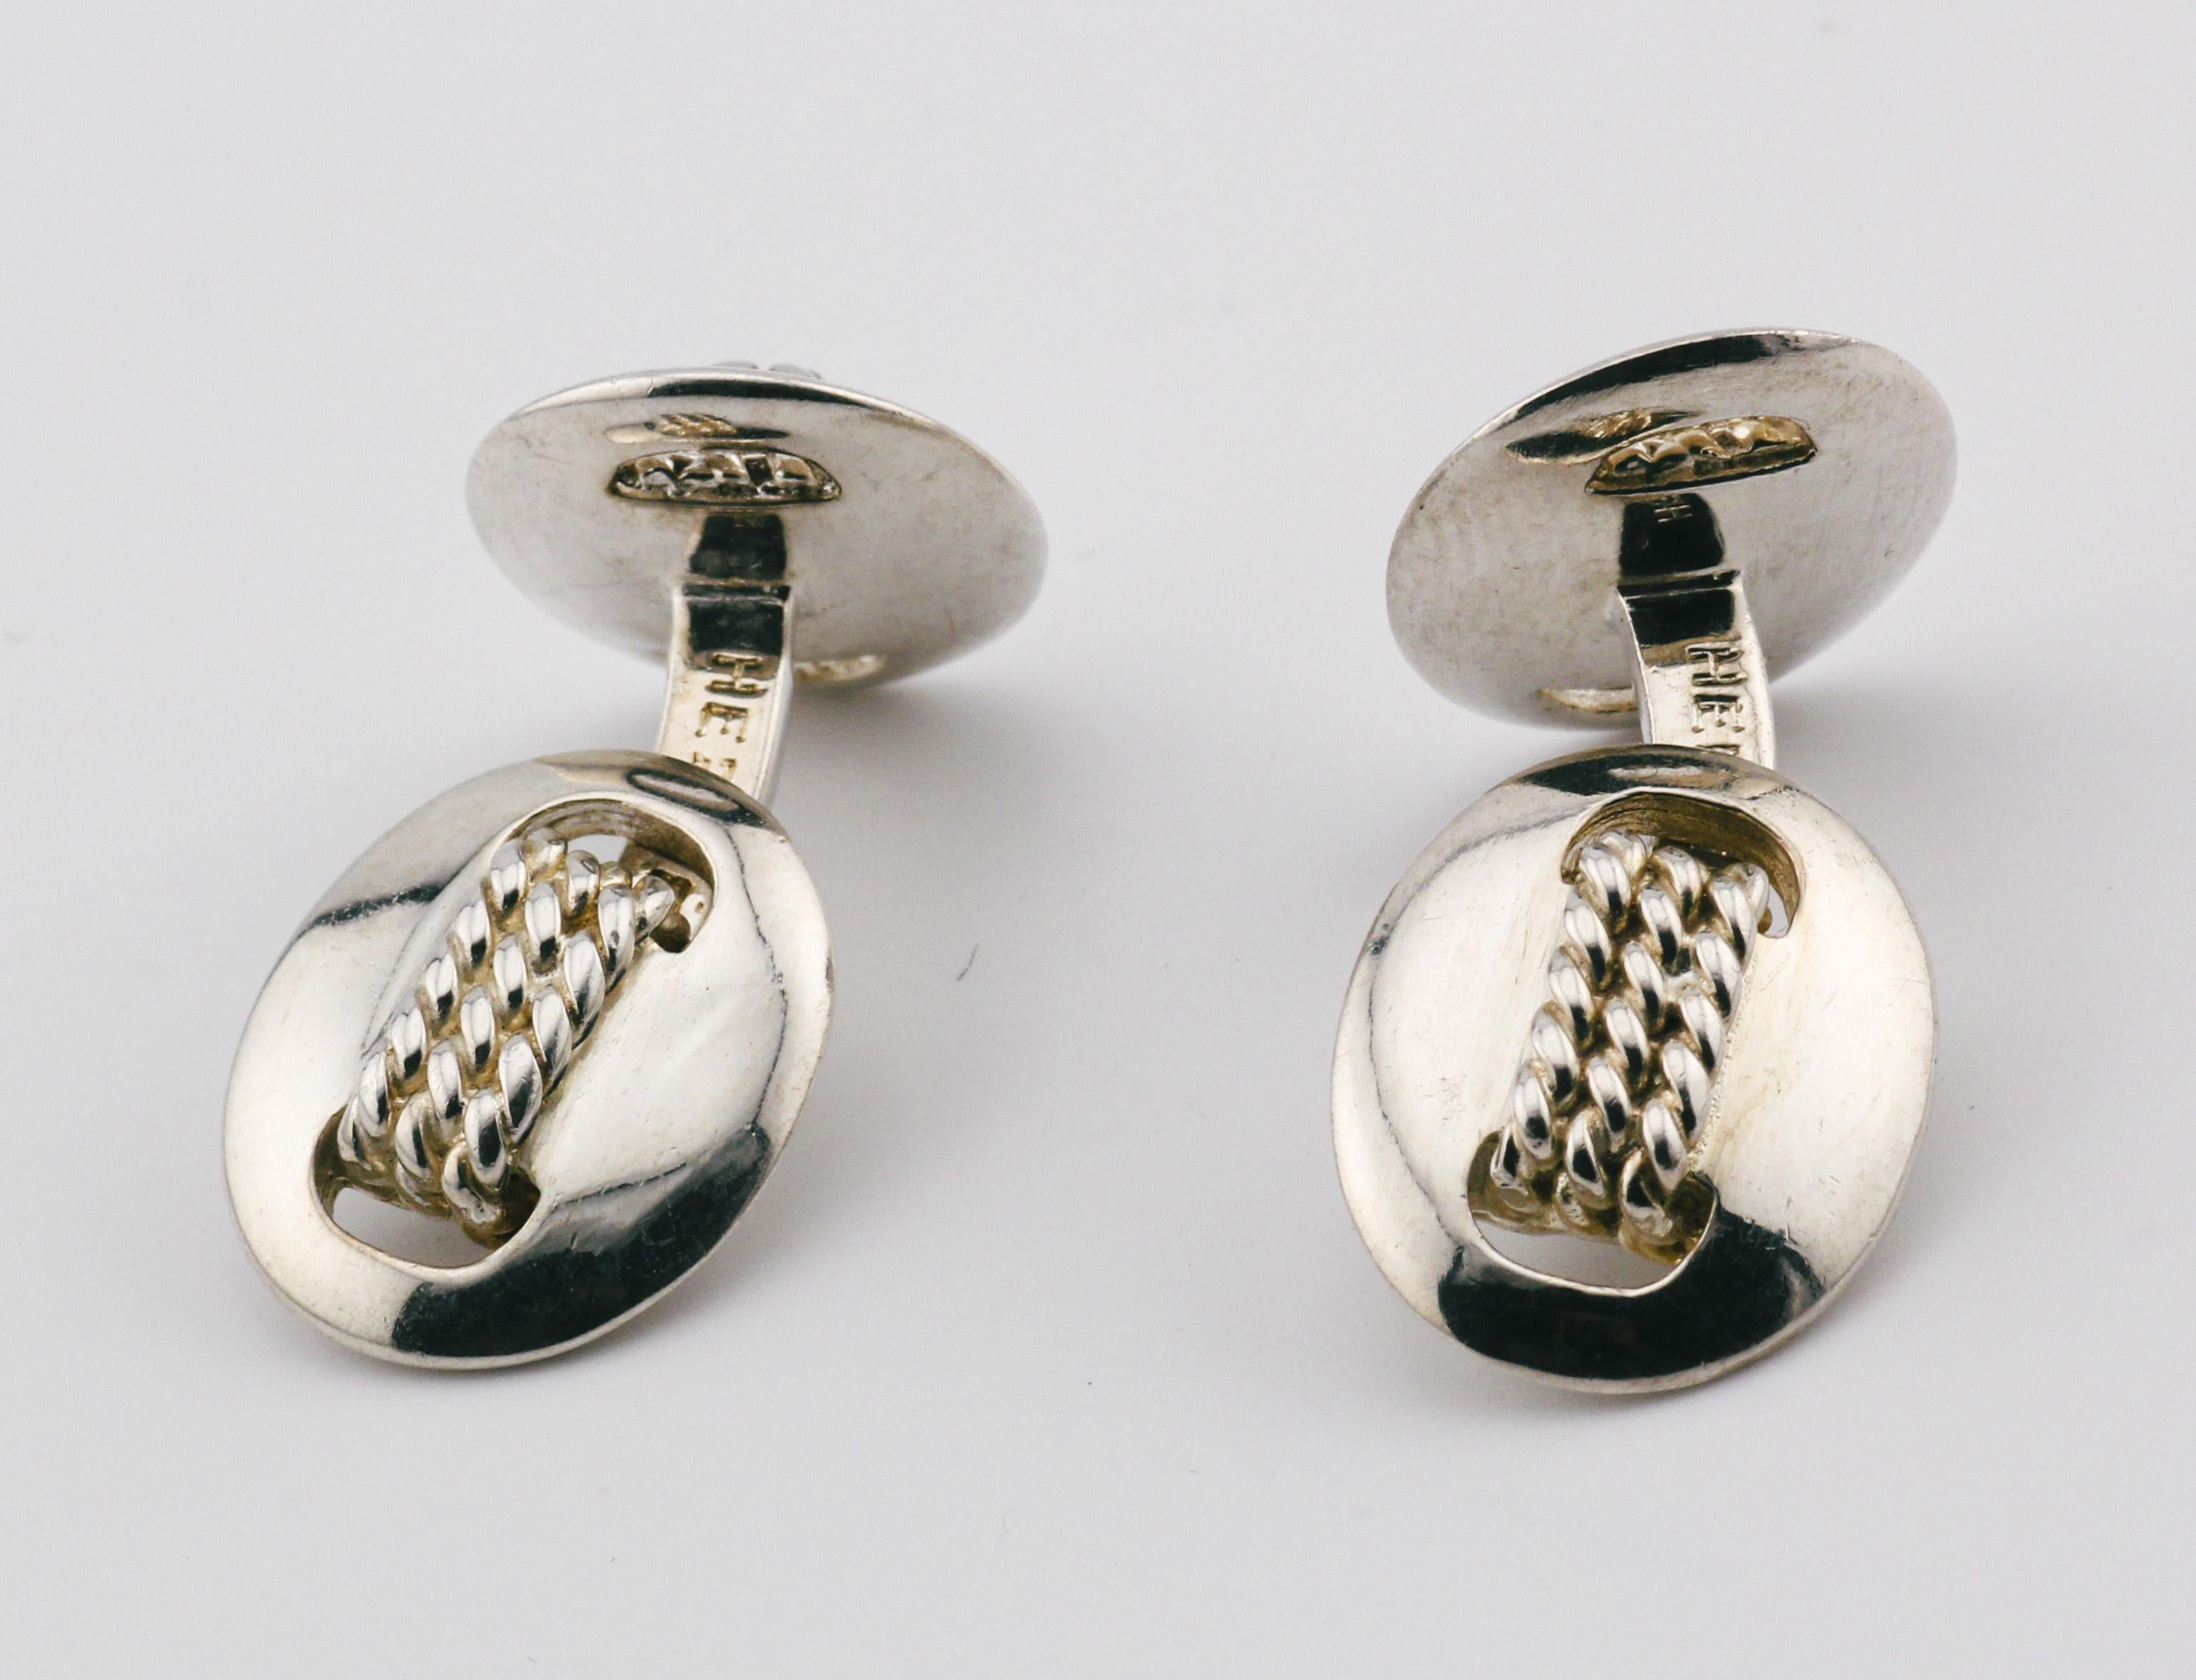 Introducing the epitome of timeless elegance and sophistication: Hermes Vintage Sterling Silver Rope Motif Cufflinks. Crafted to perfection, these exquisite cufflinks are a testament to Hermes' legacy of luxury and impeccable craftsmanship.

Each